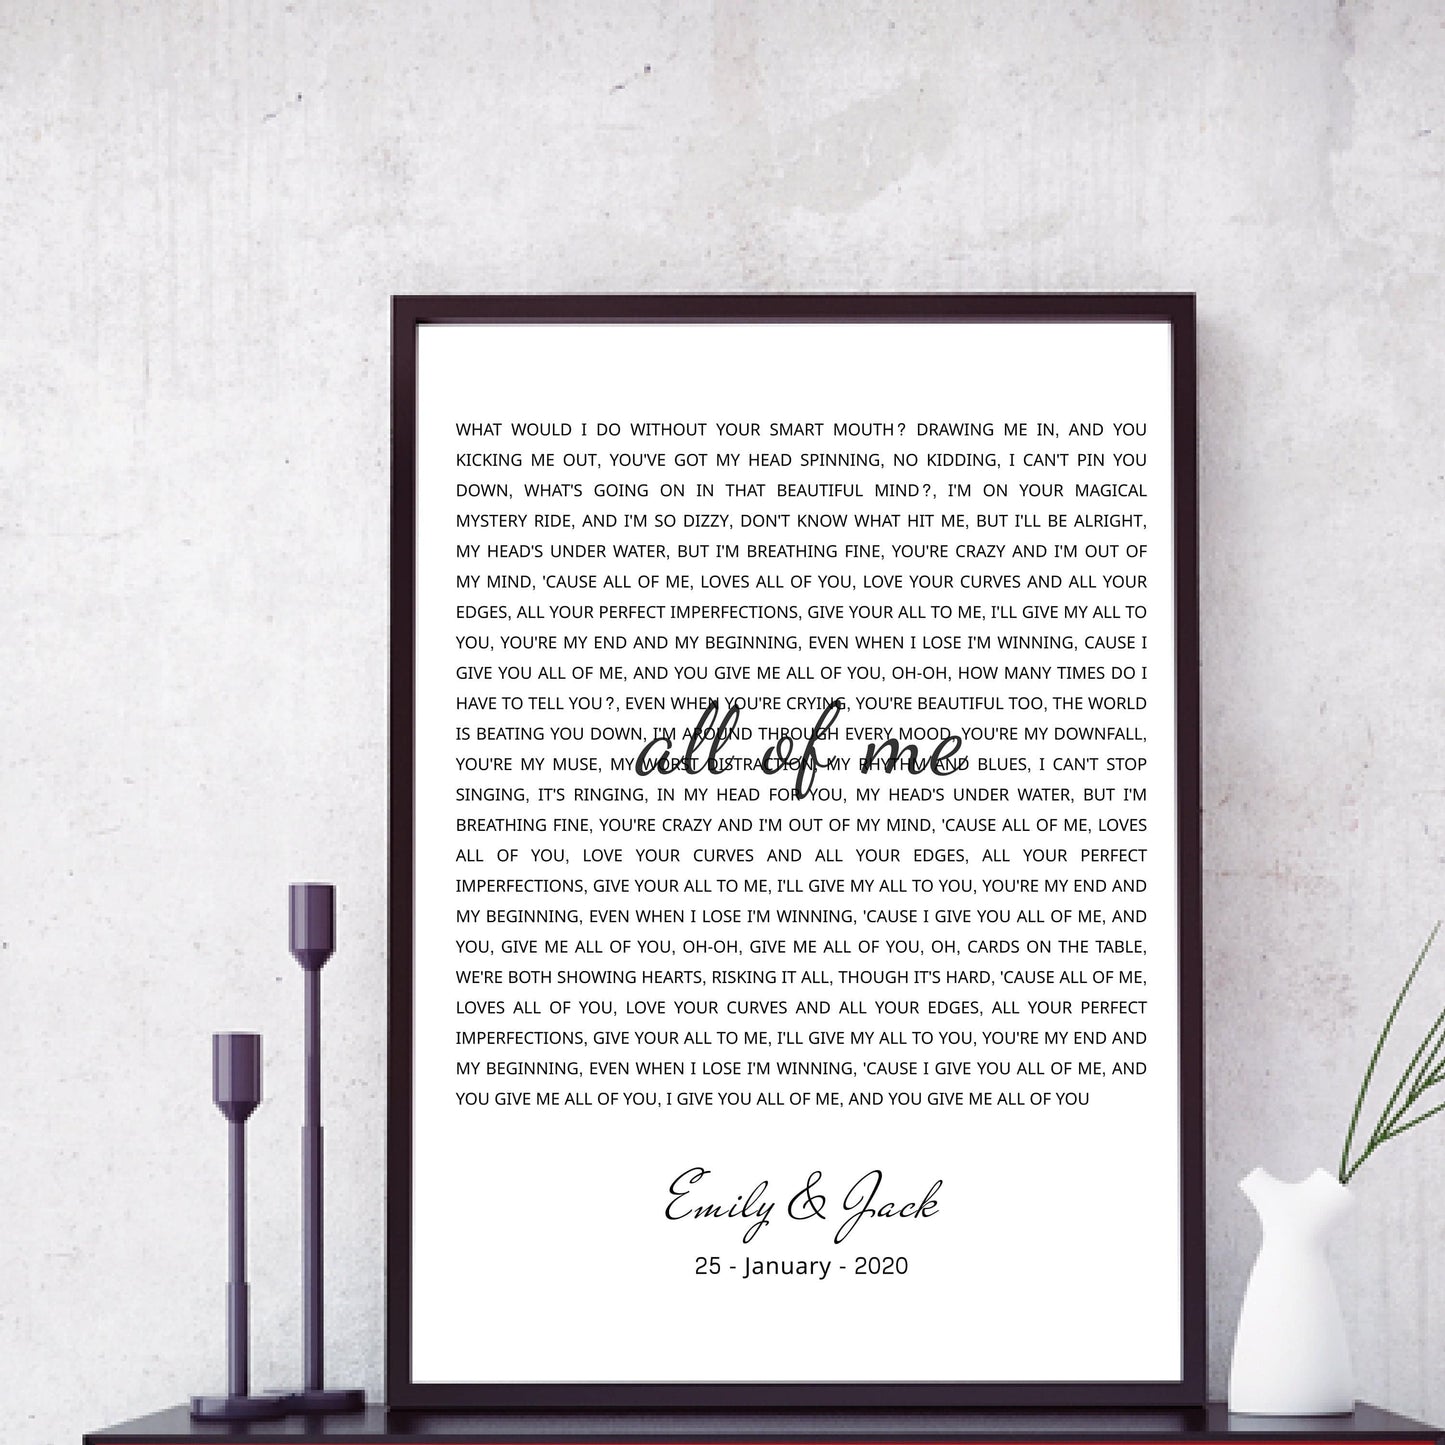 Personalized Song Lyrics Print - Custom Wall Art Frame- Wedding, Anniversary Gifts - For Her, Him, Couples - First Dance - Our Song- digital